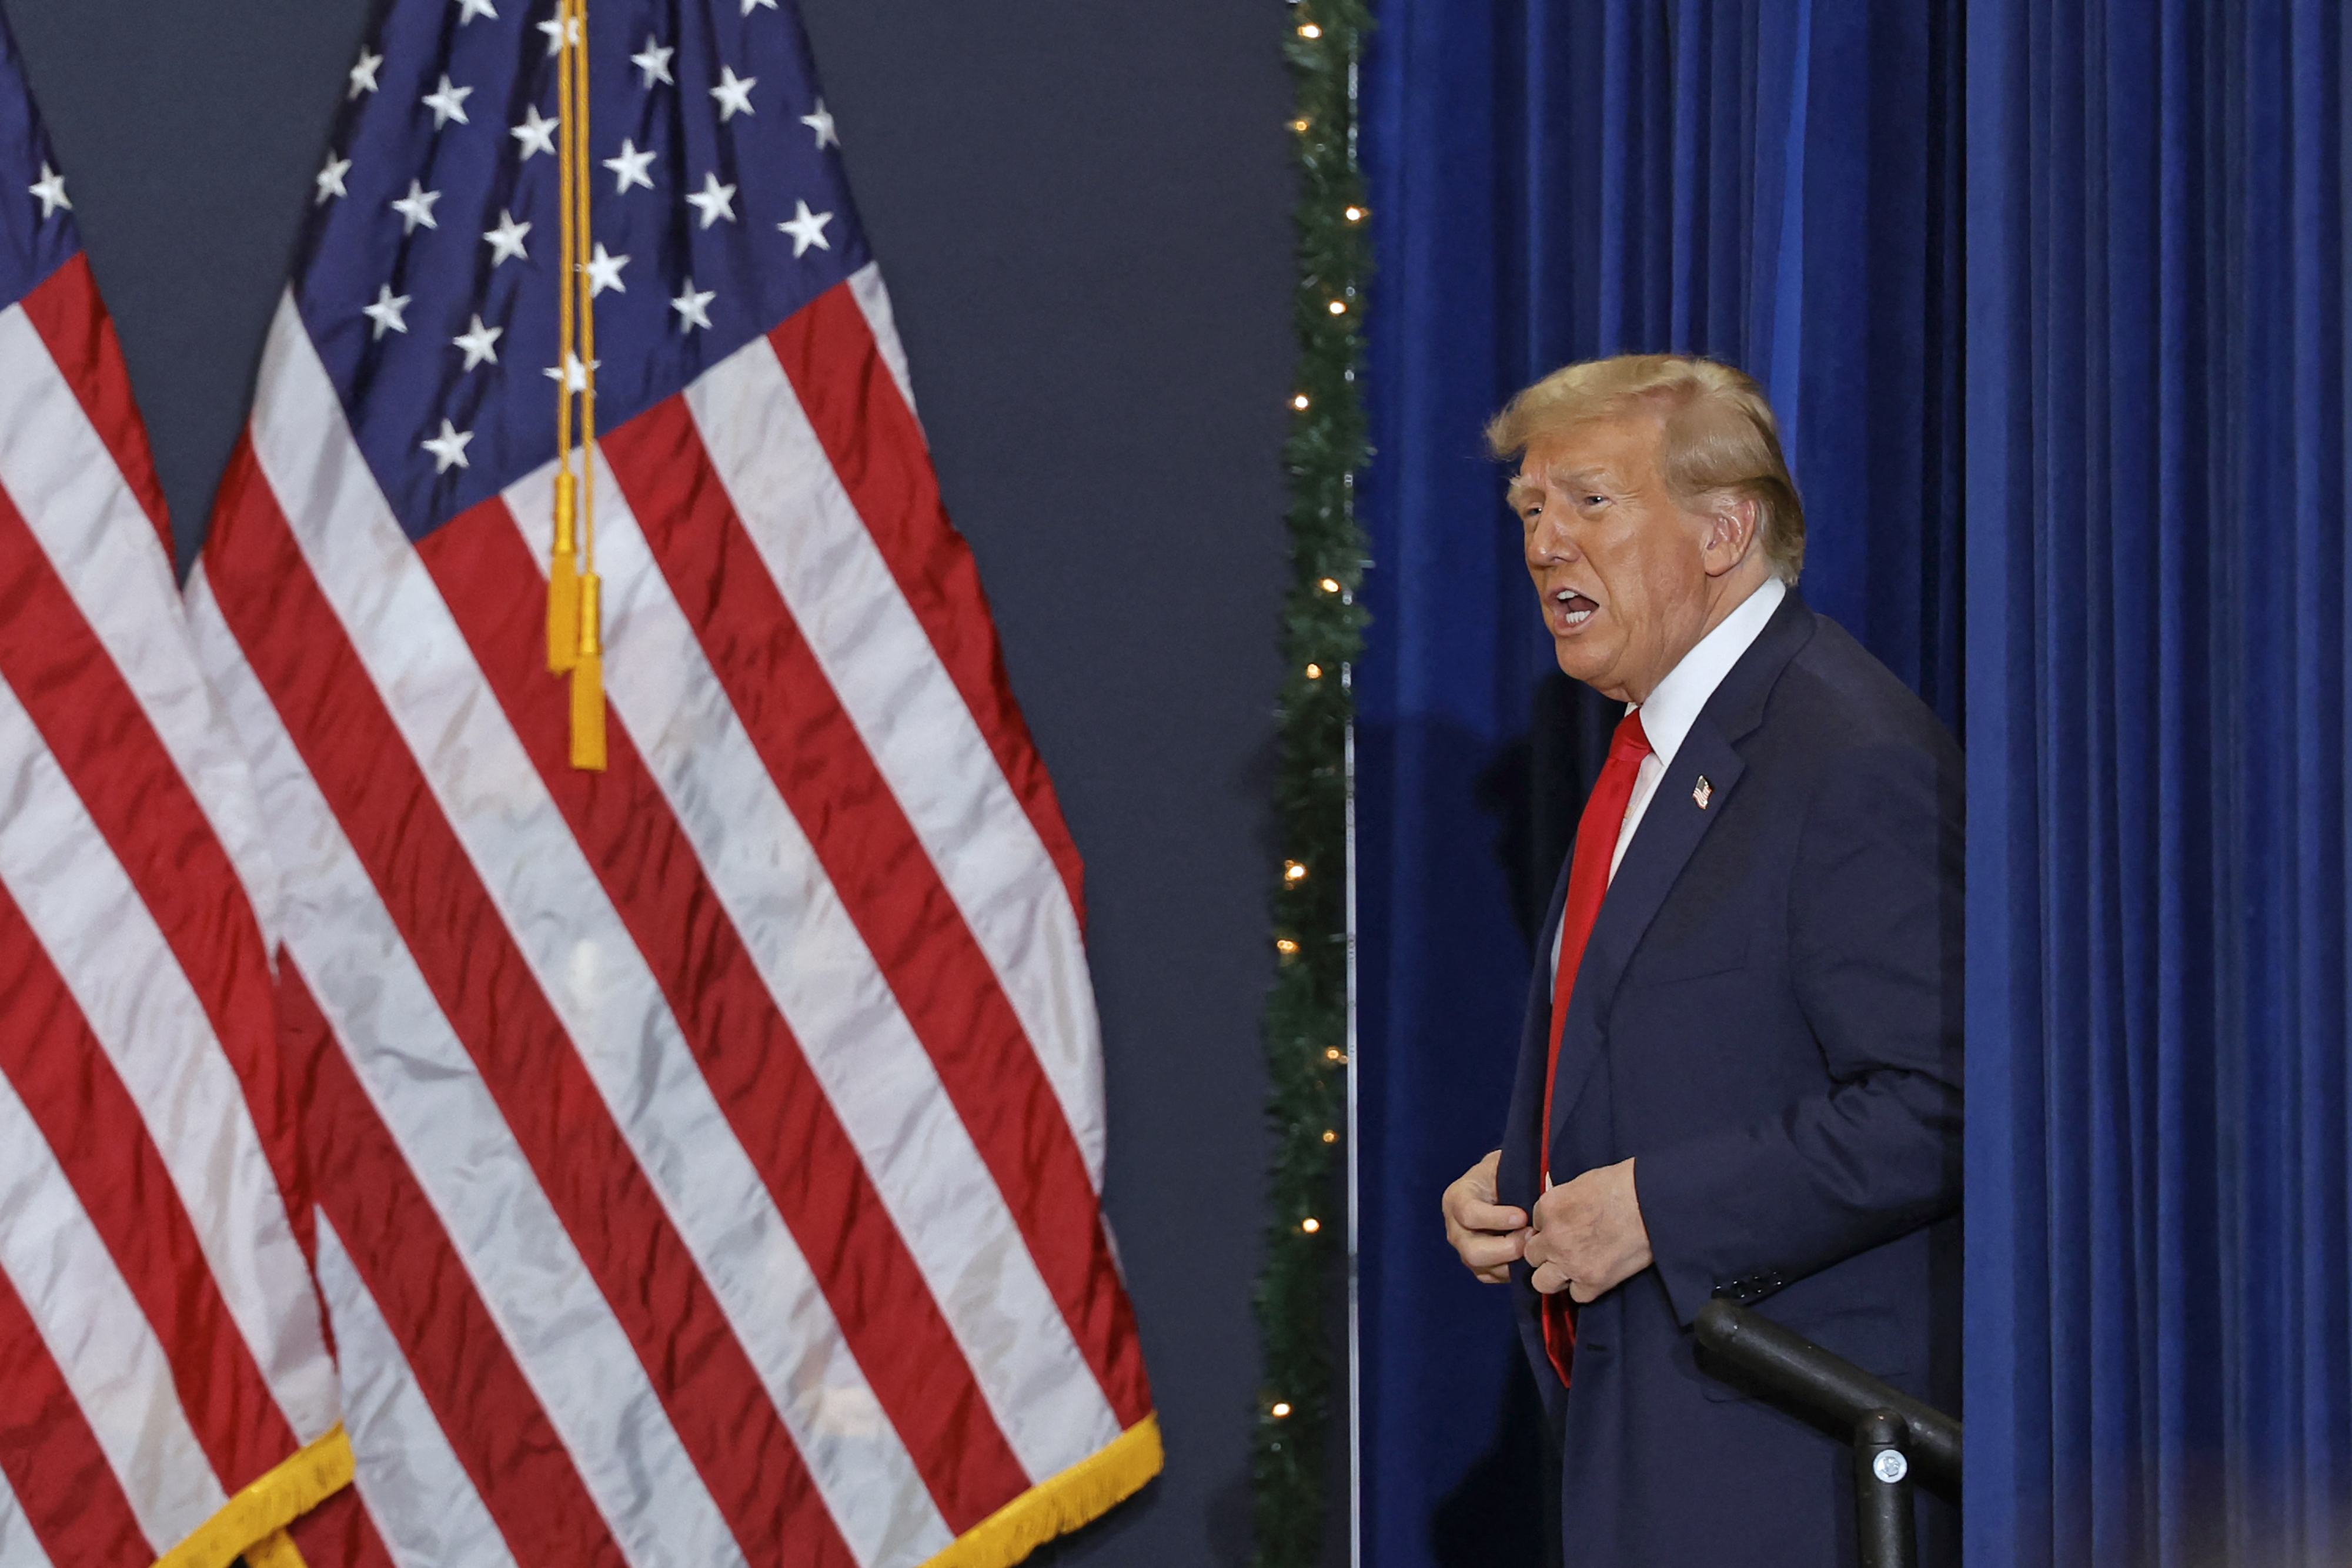 Donald Trump walking onto a stage with large American flags as decoration.